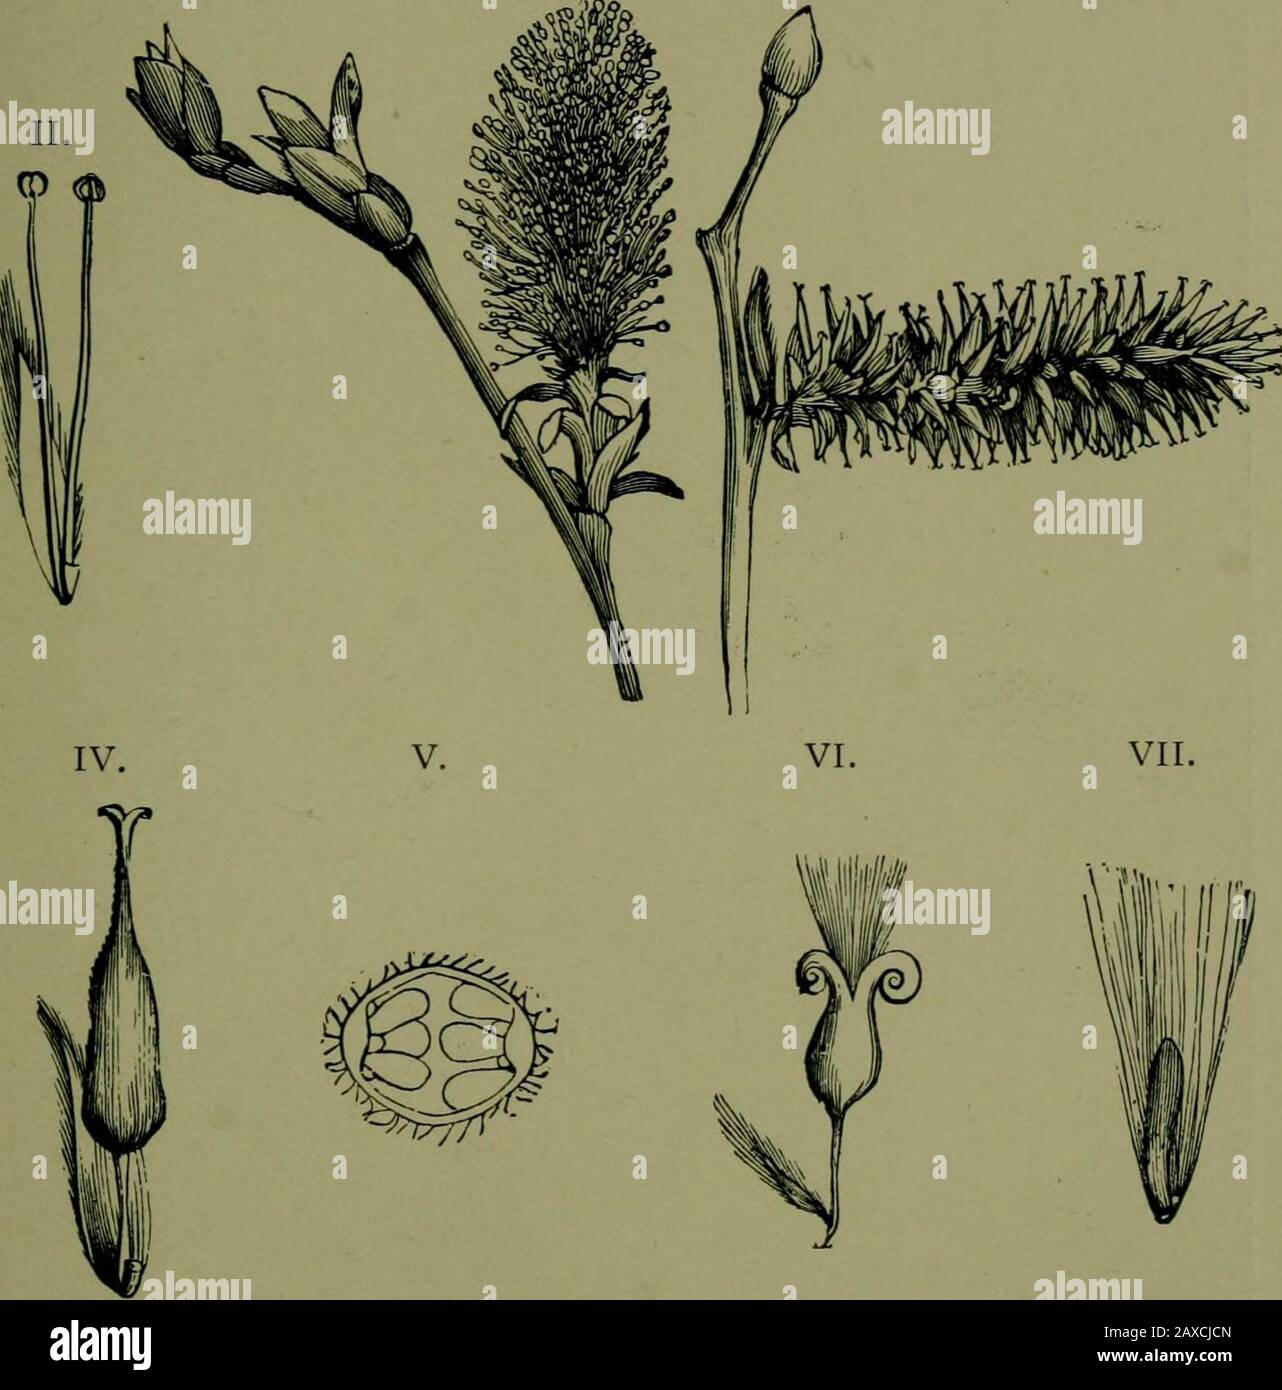 Plants and their ways in South Africa . Fig. 255.—A, Catkin or amentum of the Oak. I. Flower of Oak. II.Female flowers. (Both x 3.) (From Edmonds and Marloths ElementaryBotany for South Africa .) The flowers of Willows, Poplars, and Myrica (the Wax Bush) are sub-tended by a single bract. The staminate flowers of the Oak have agreenish 6-parted perianth. The few genera in each order, the simpleflowers and fossil forms, indicate that these orders represent very oldfamilies of flowering plants. Salicaceae.—Flowers dioecious. Capsules containingmany minute seeds. The order contains two genera, Pop Stock Photo